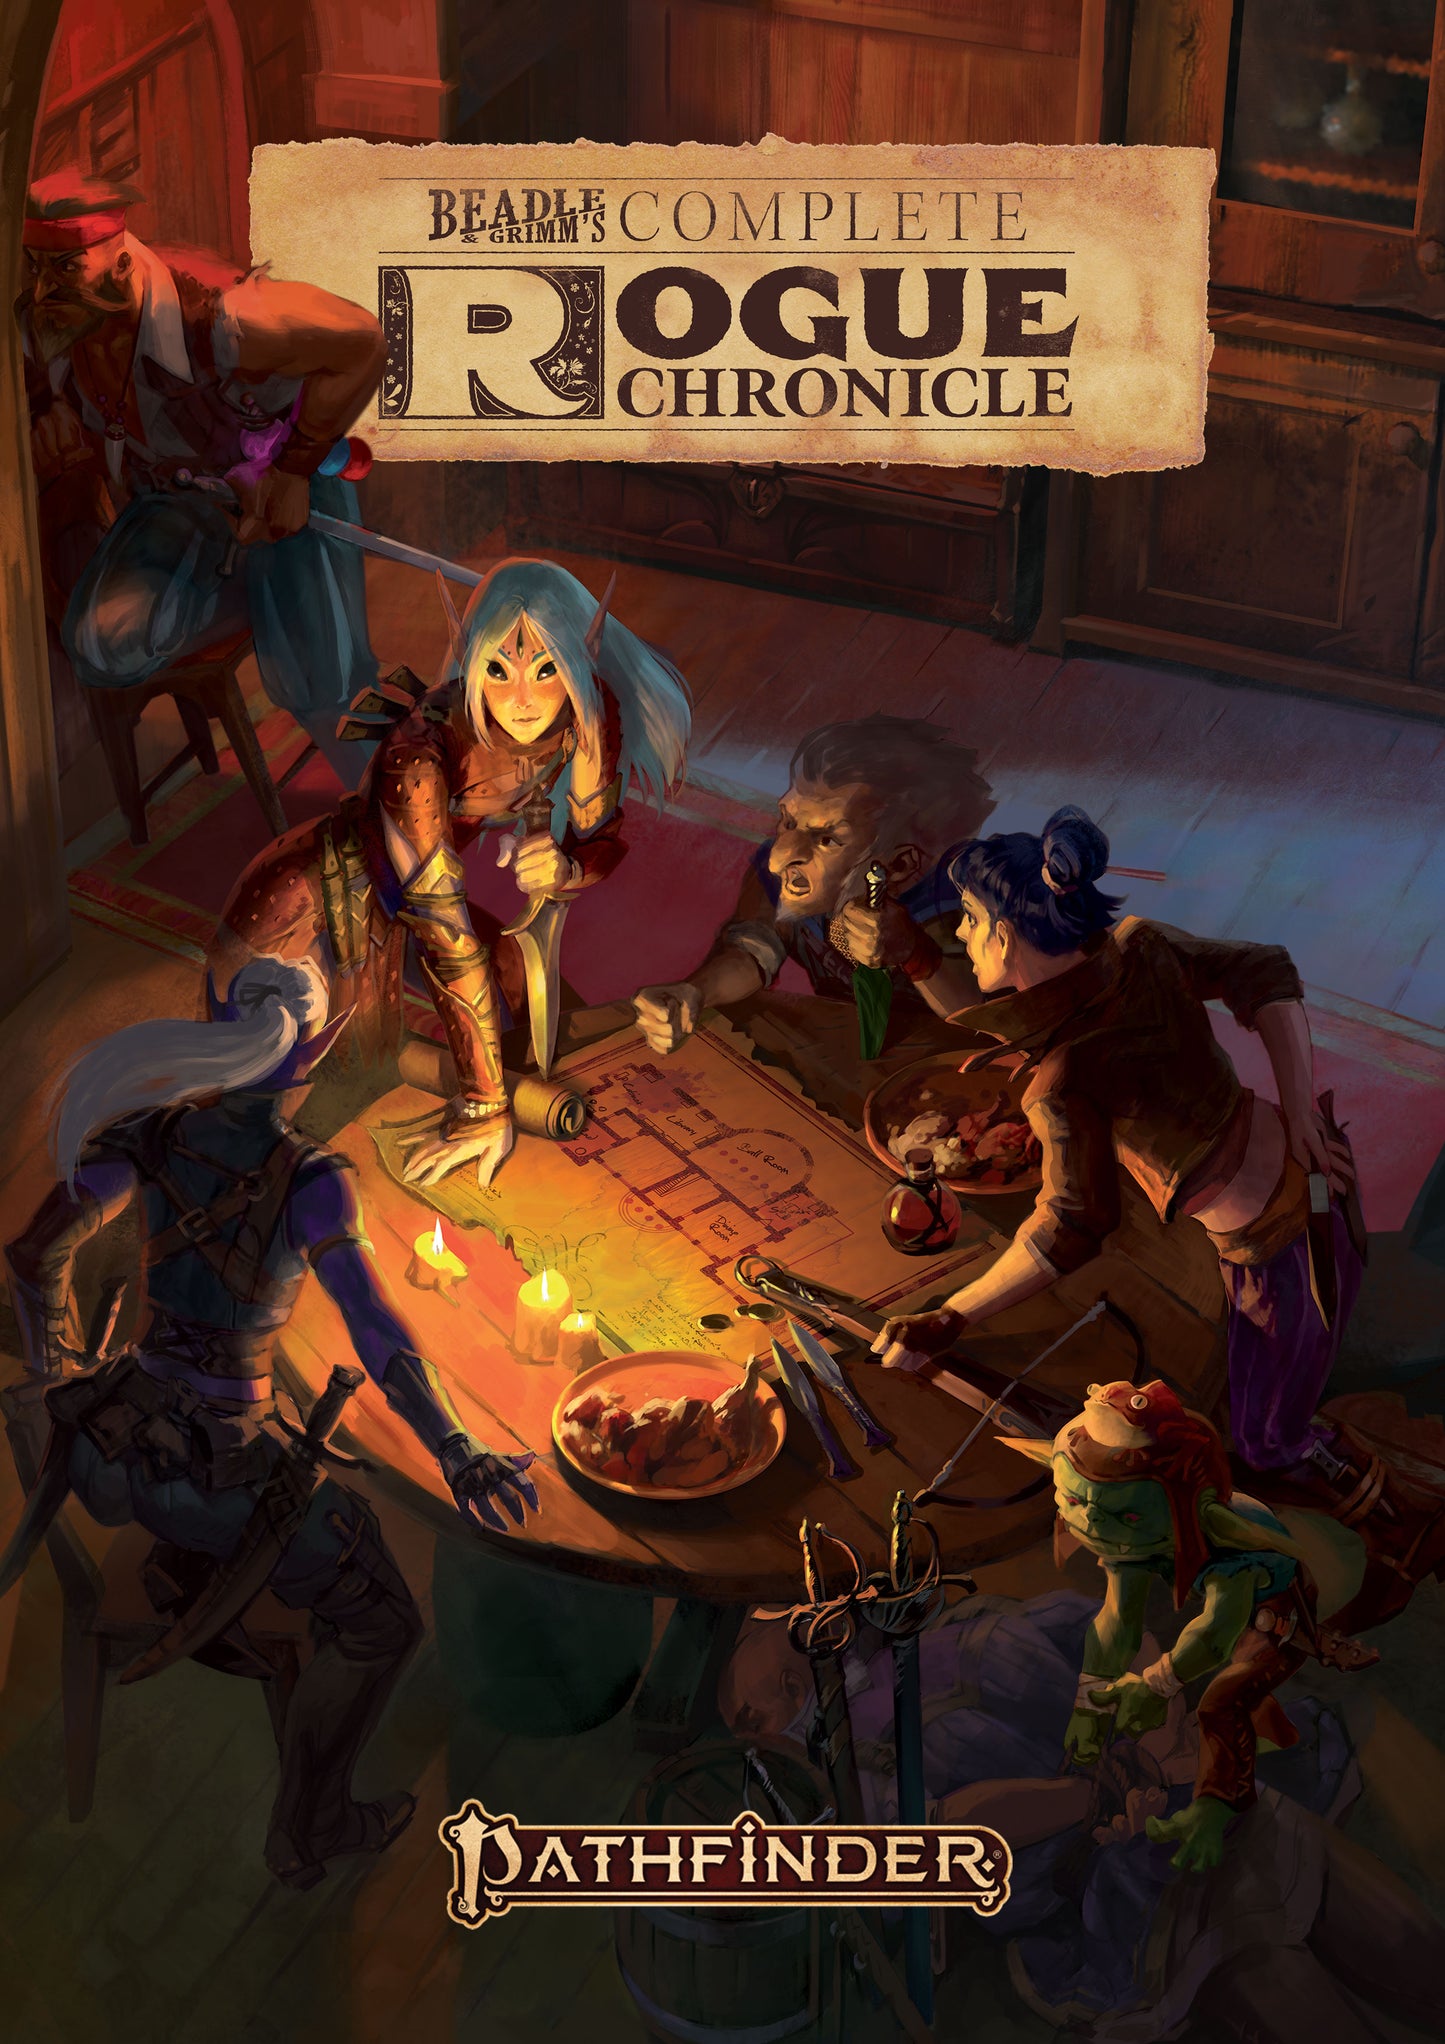 Limited Edition of Rogue Character Chronicle